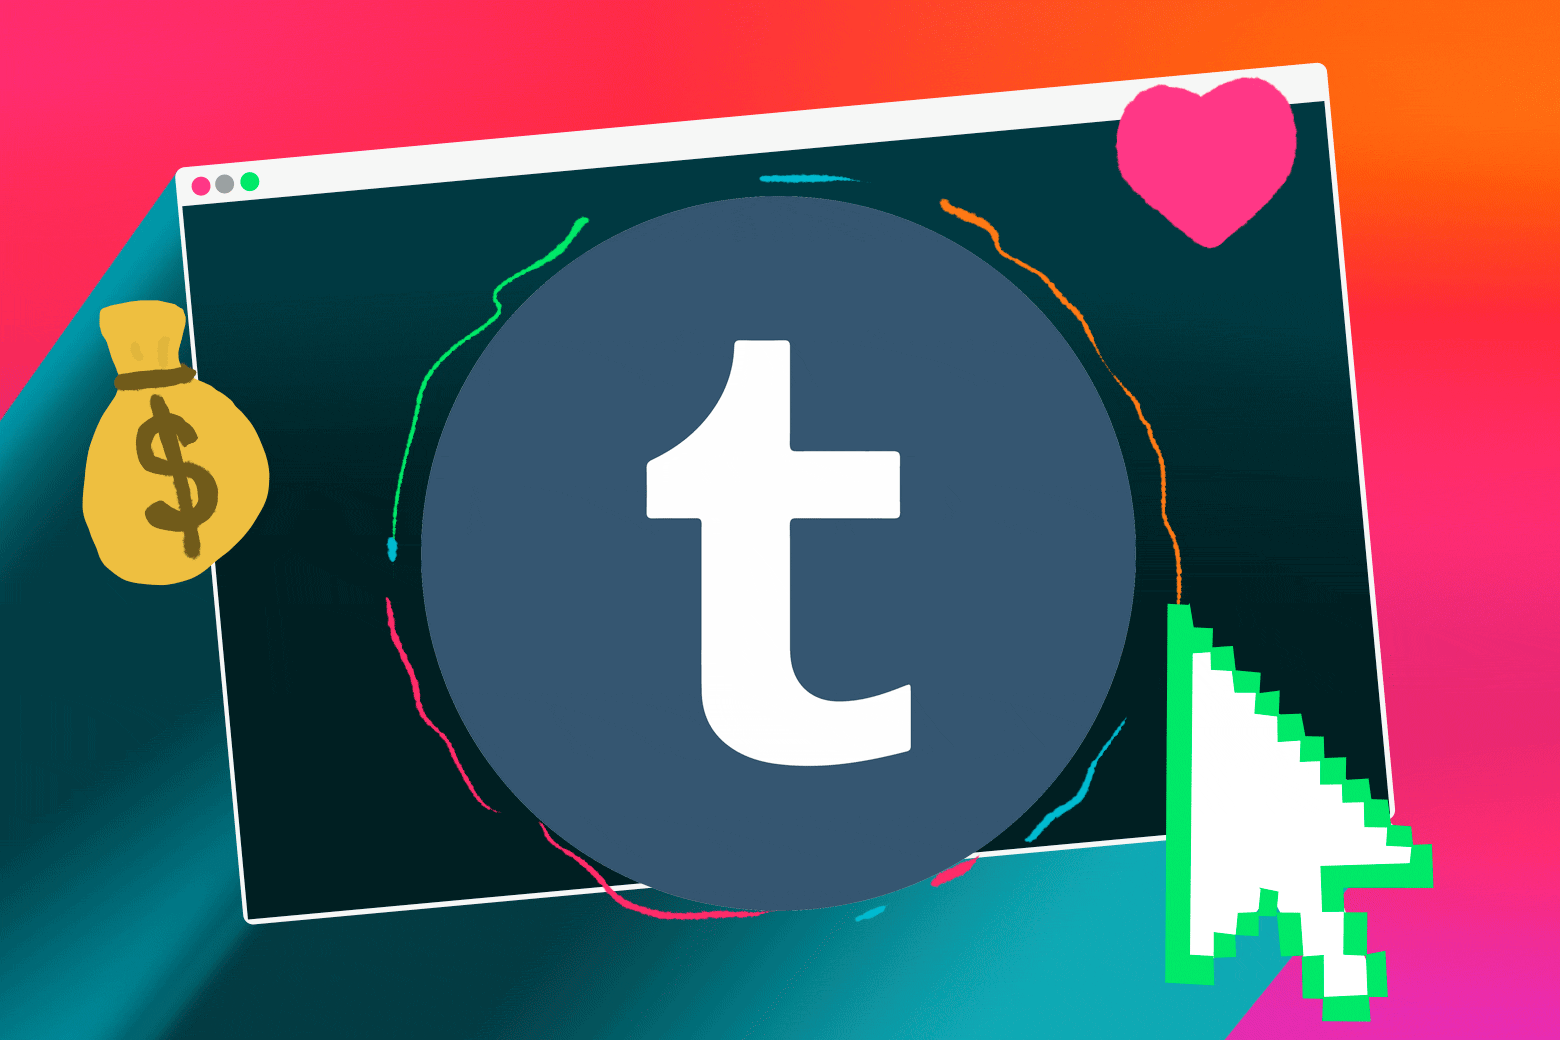 An animated image of the blue circle Tumblr logo with a T in the middle, surrounded by an animated bag with a dollar sign on it.